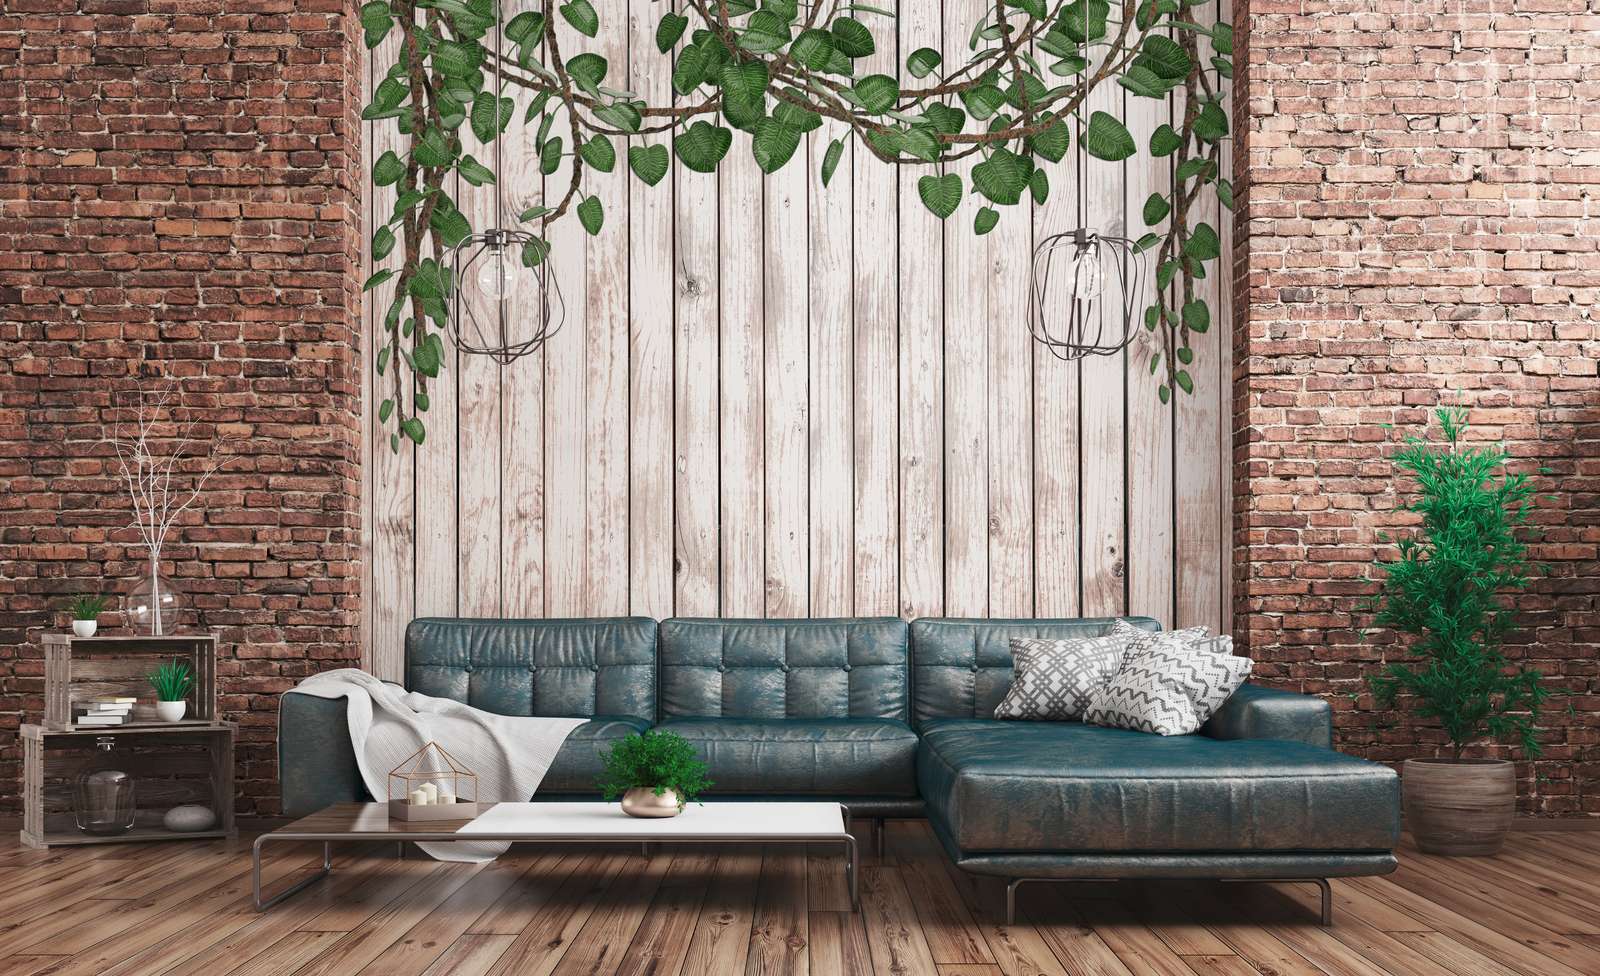             Wooden wall mural with falling leaves natural - Green, Beige
        